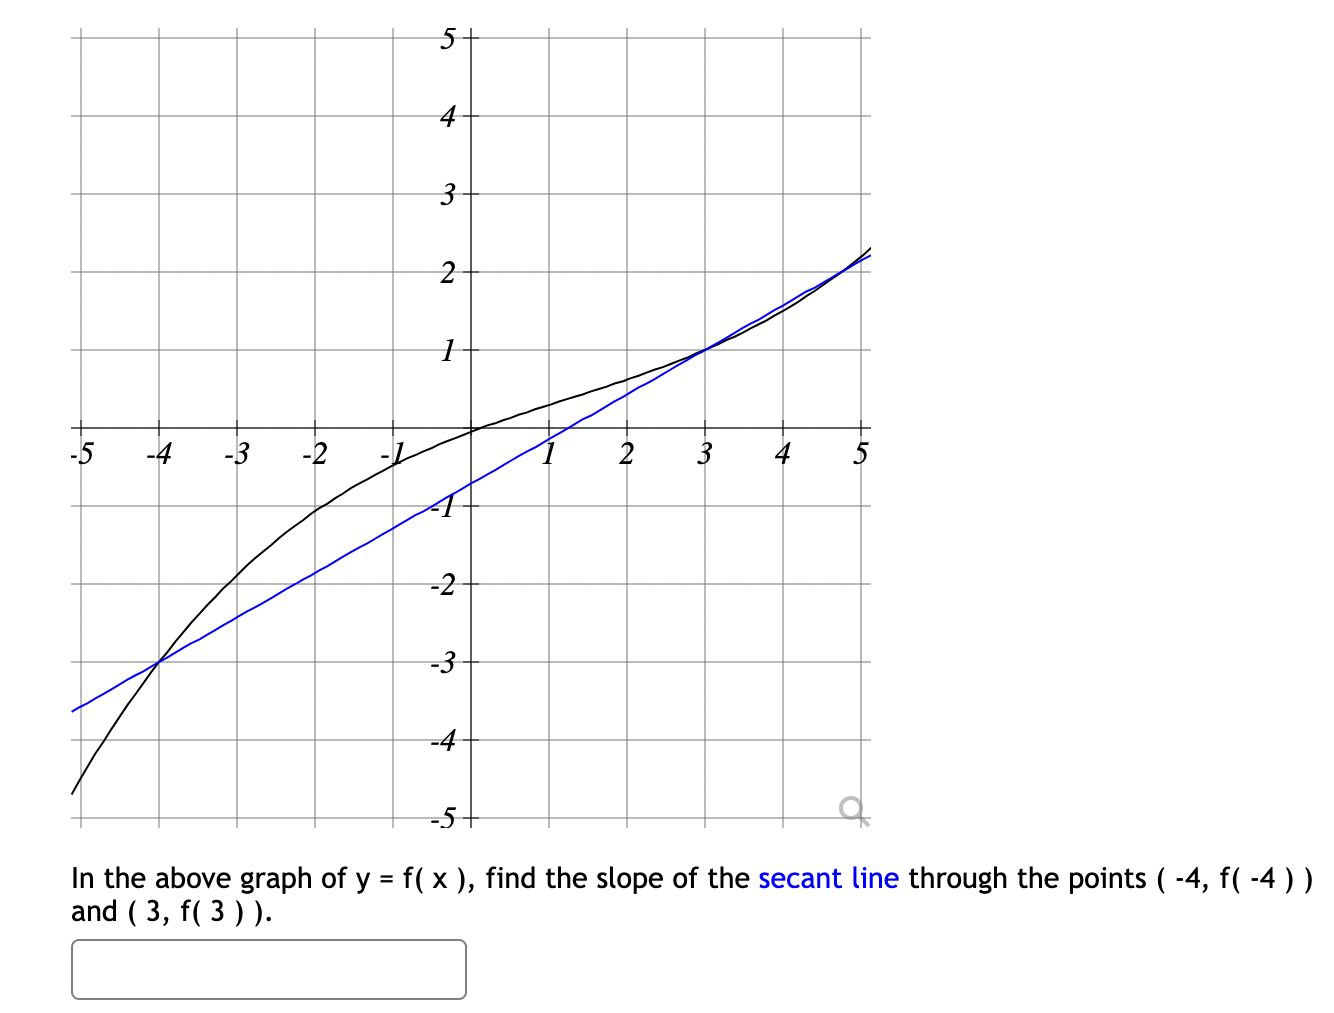 In the above graph of \( y=f(x) \), find the slope of the secant line through the points \( (-4, f(-4)) \) and \( (3, f(3)) \